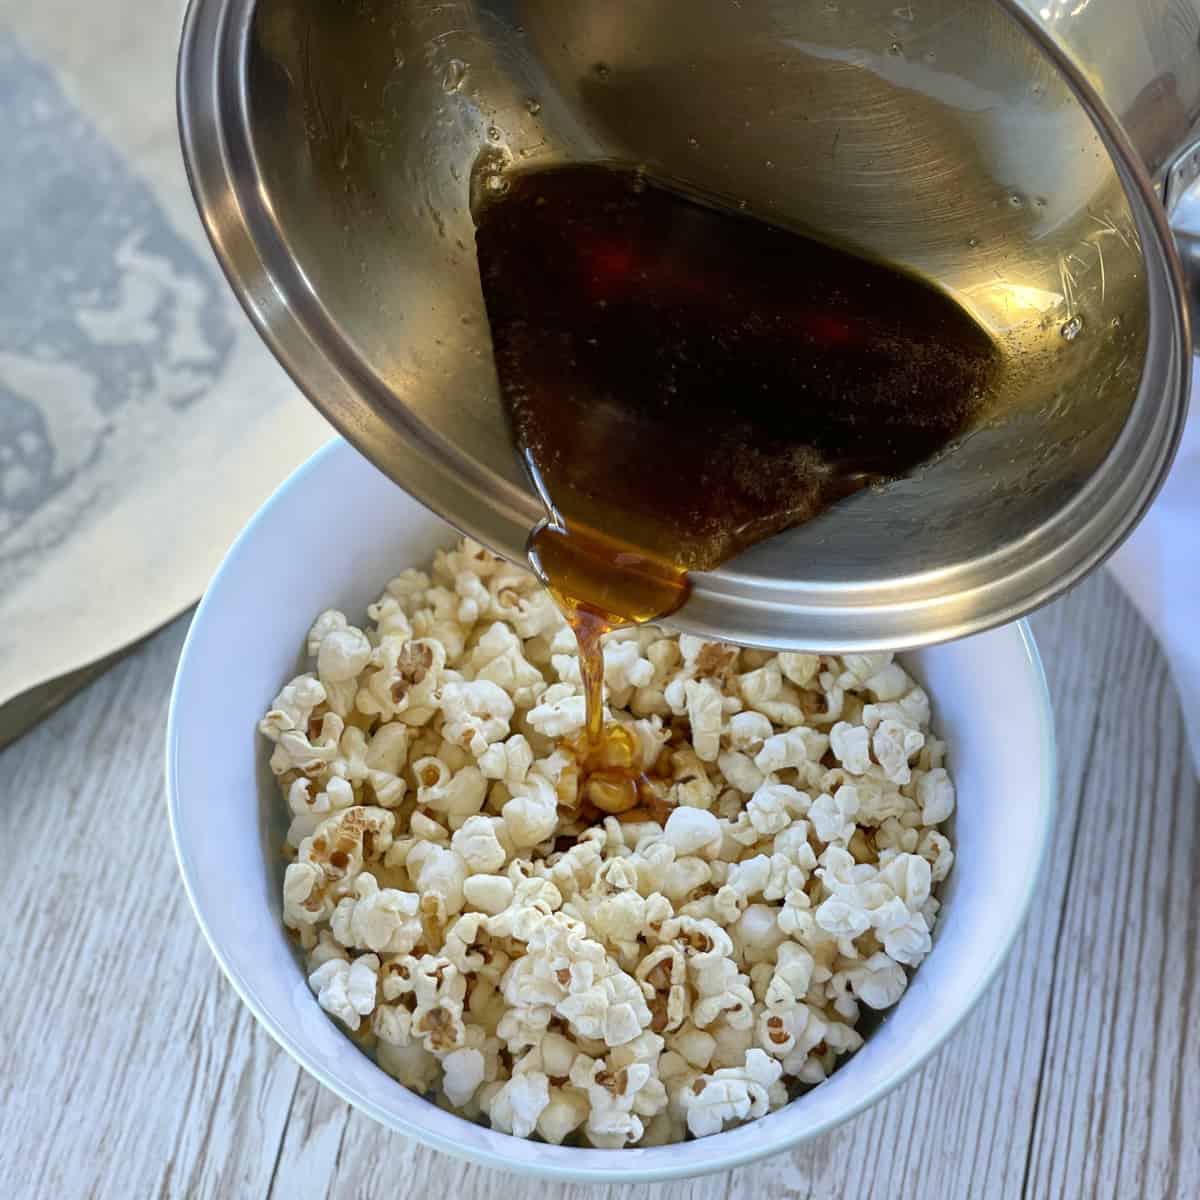 Pouring maple syrup over the popcorn 